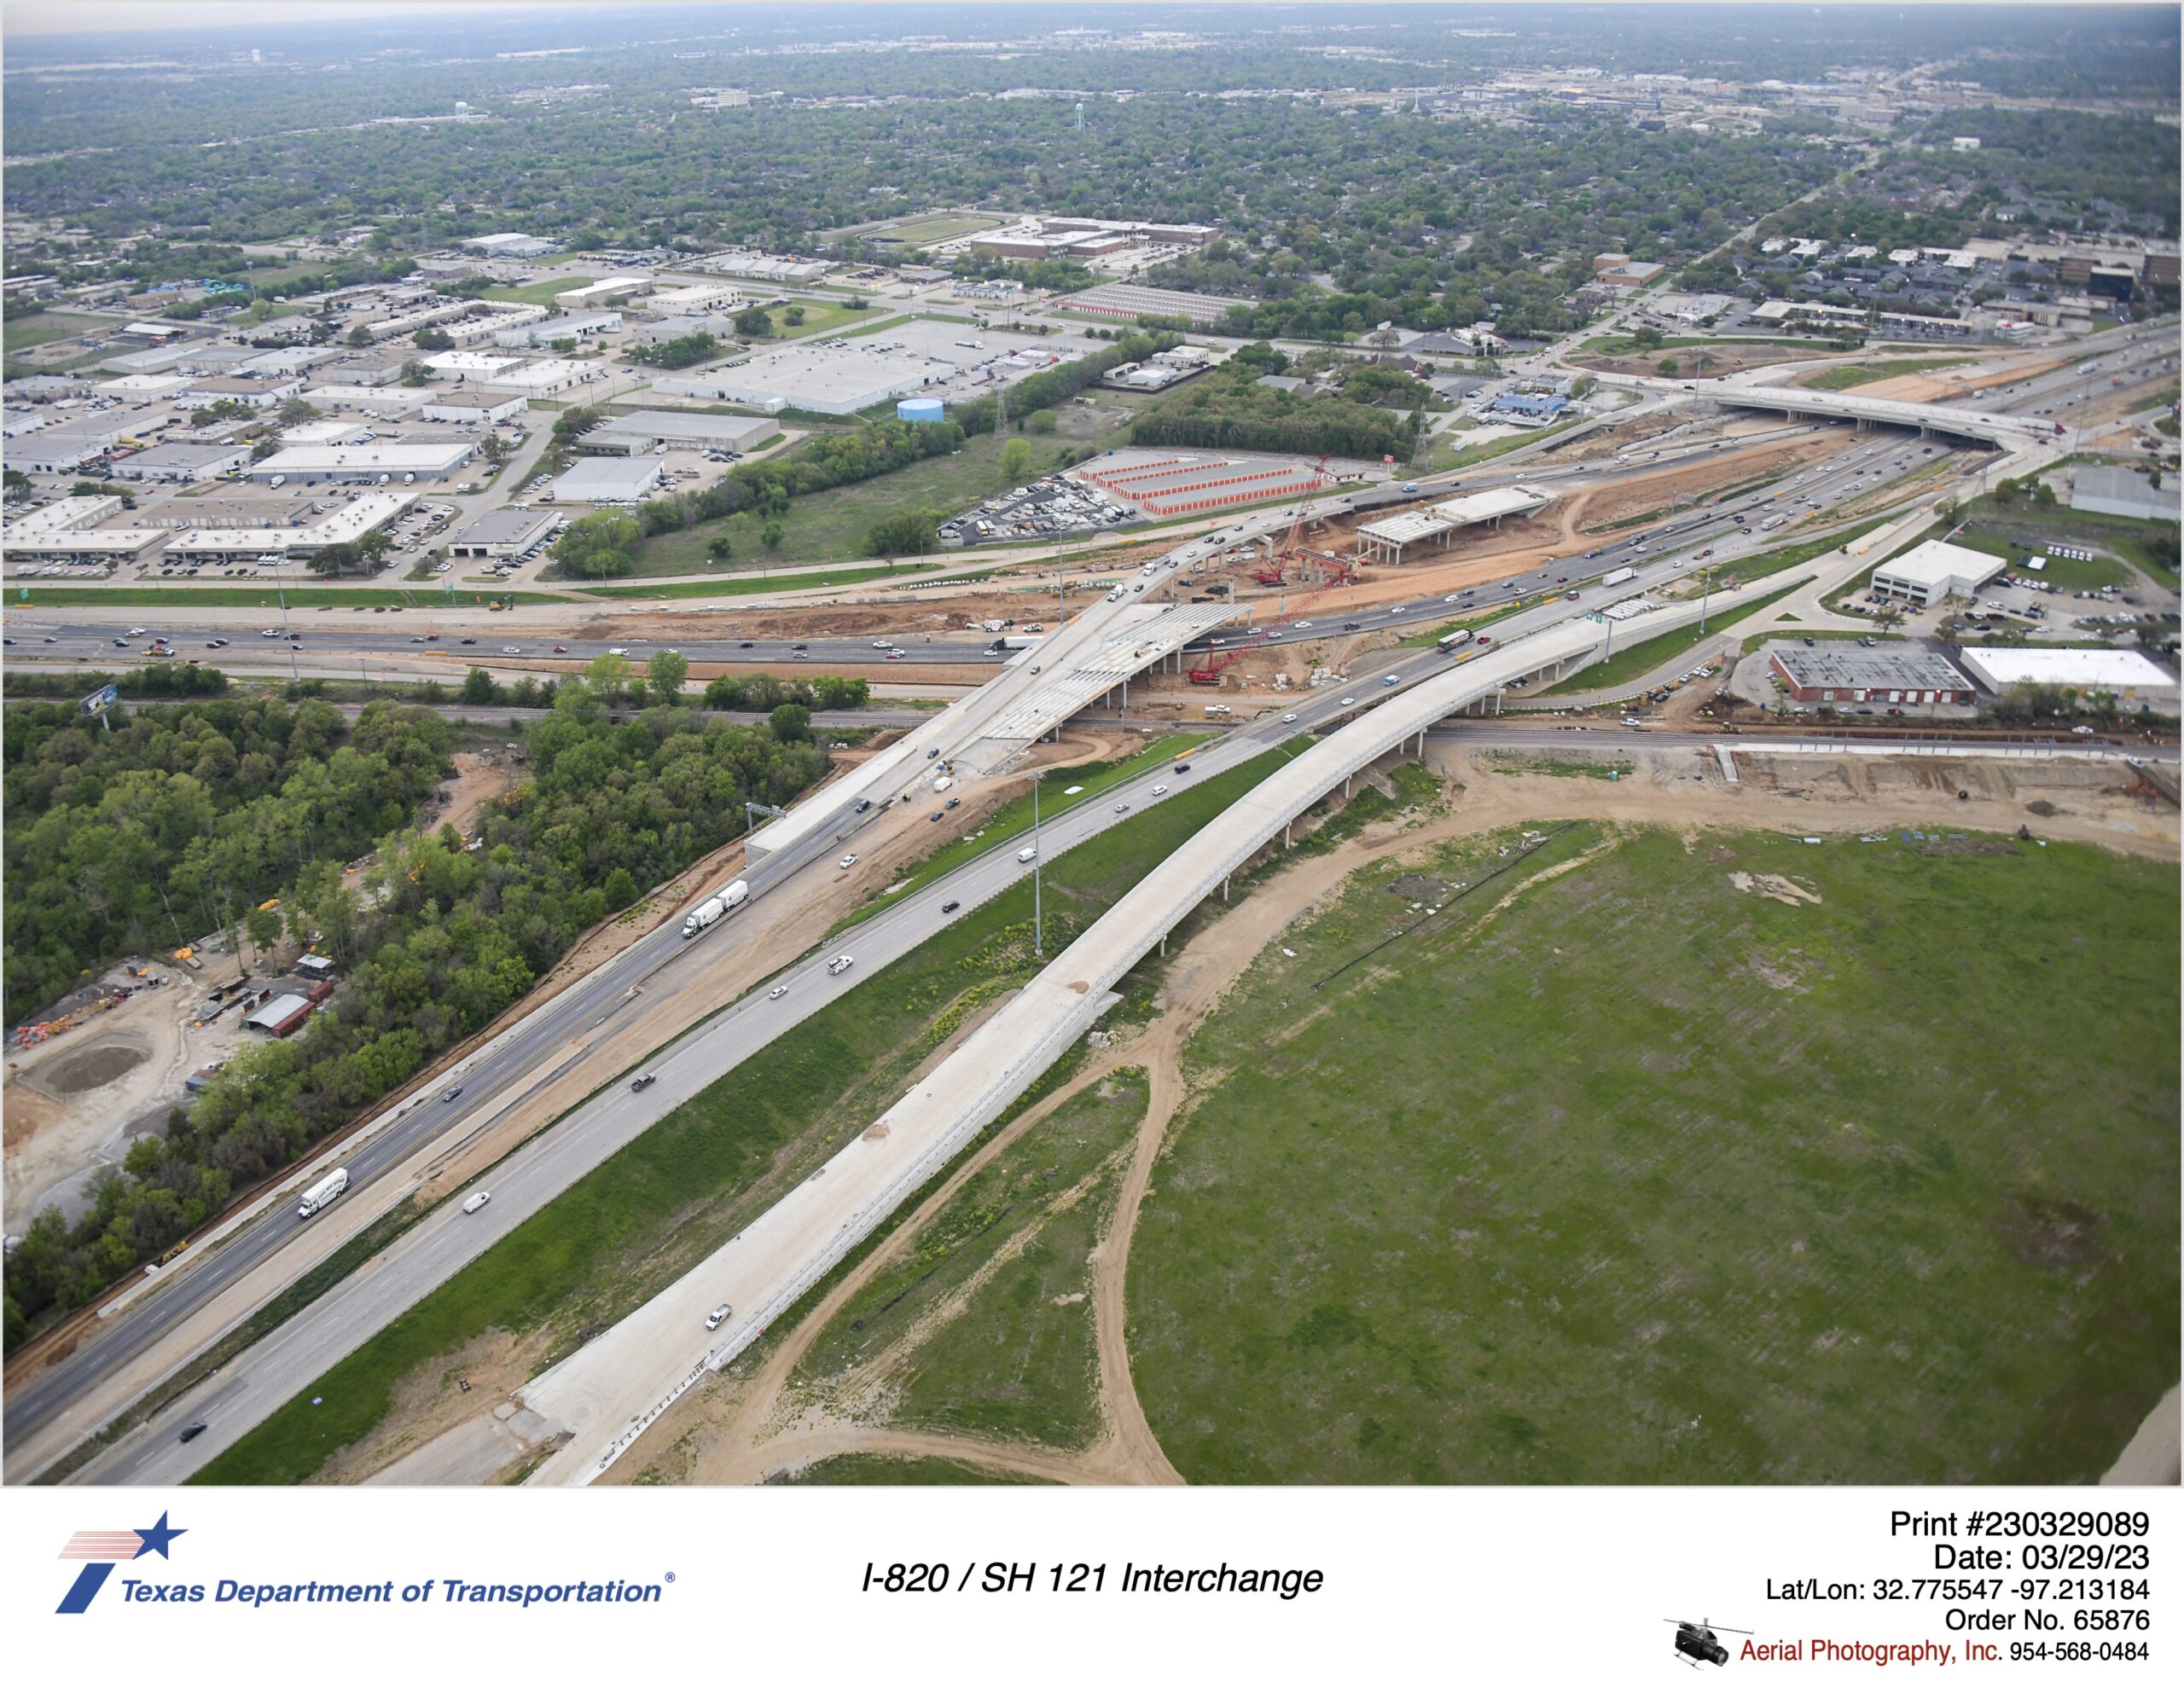 I-820 and SH 121 interchange looking north focusing on construction of future I-820 southbound  mainalnes. March 2023.